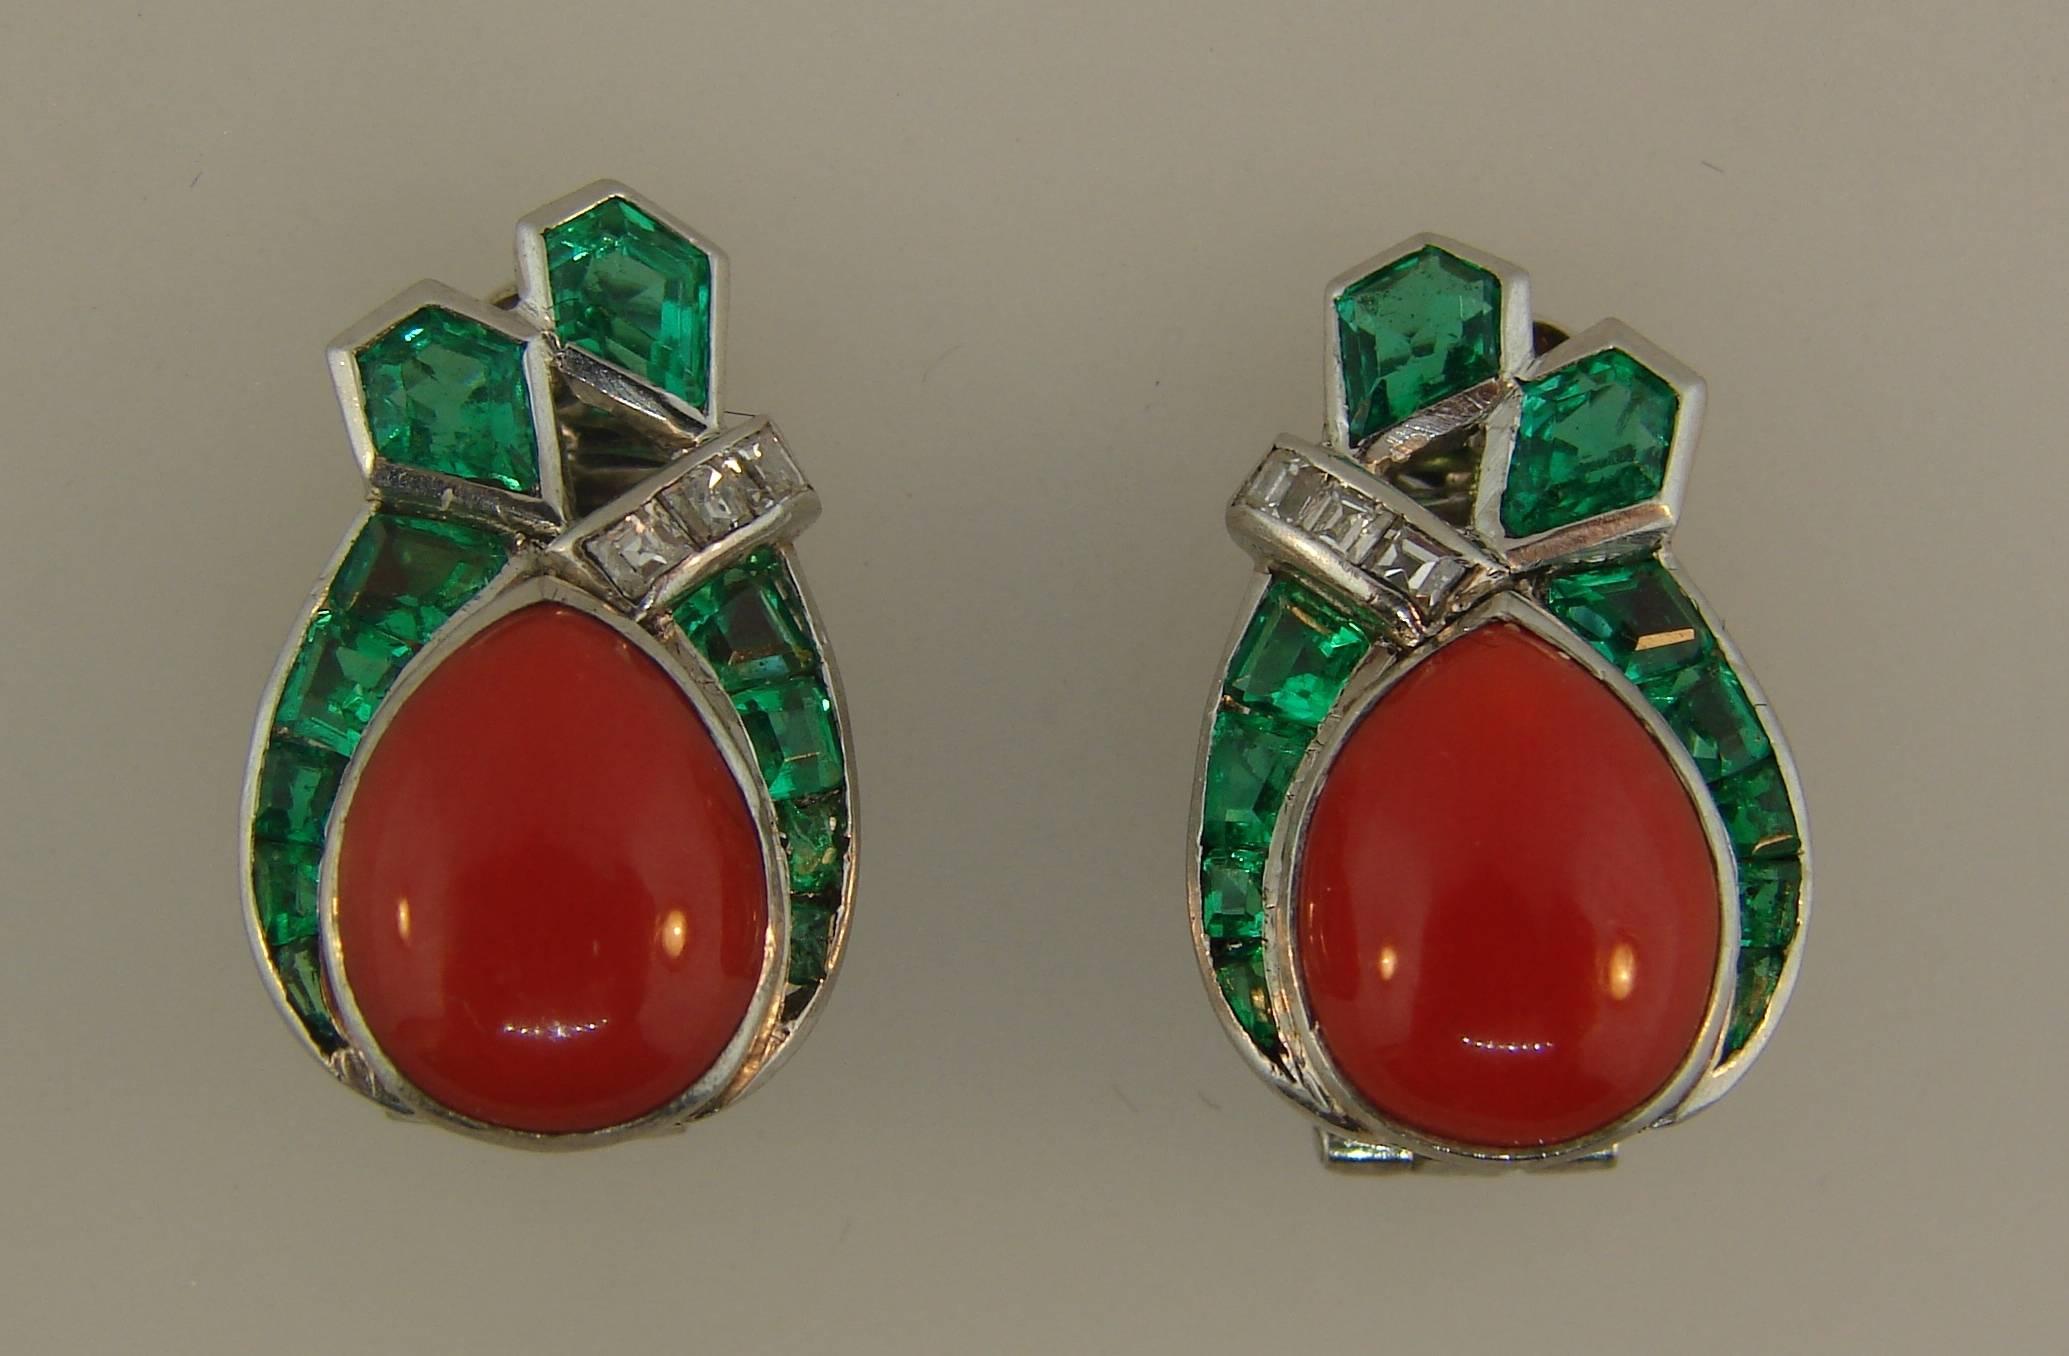 Lovely Art Deco style earrings created by Yard in the 1950's. Colorful, elegant and wearable, they are a great addition to your jewelry collection. Beautiful color combination and perfect proportions are the highlights of the pair. Stylish and chic,